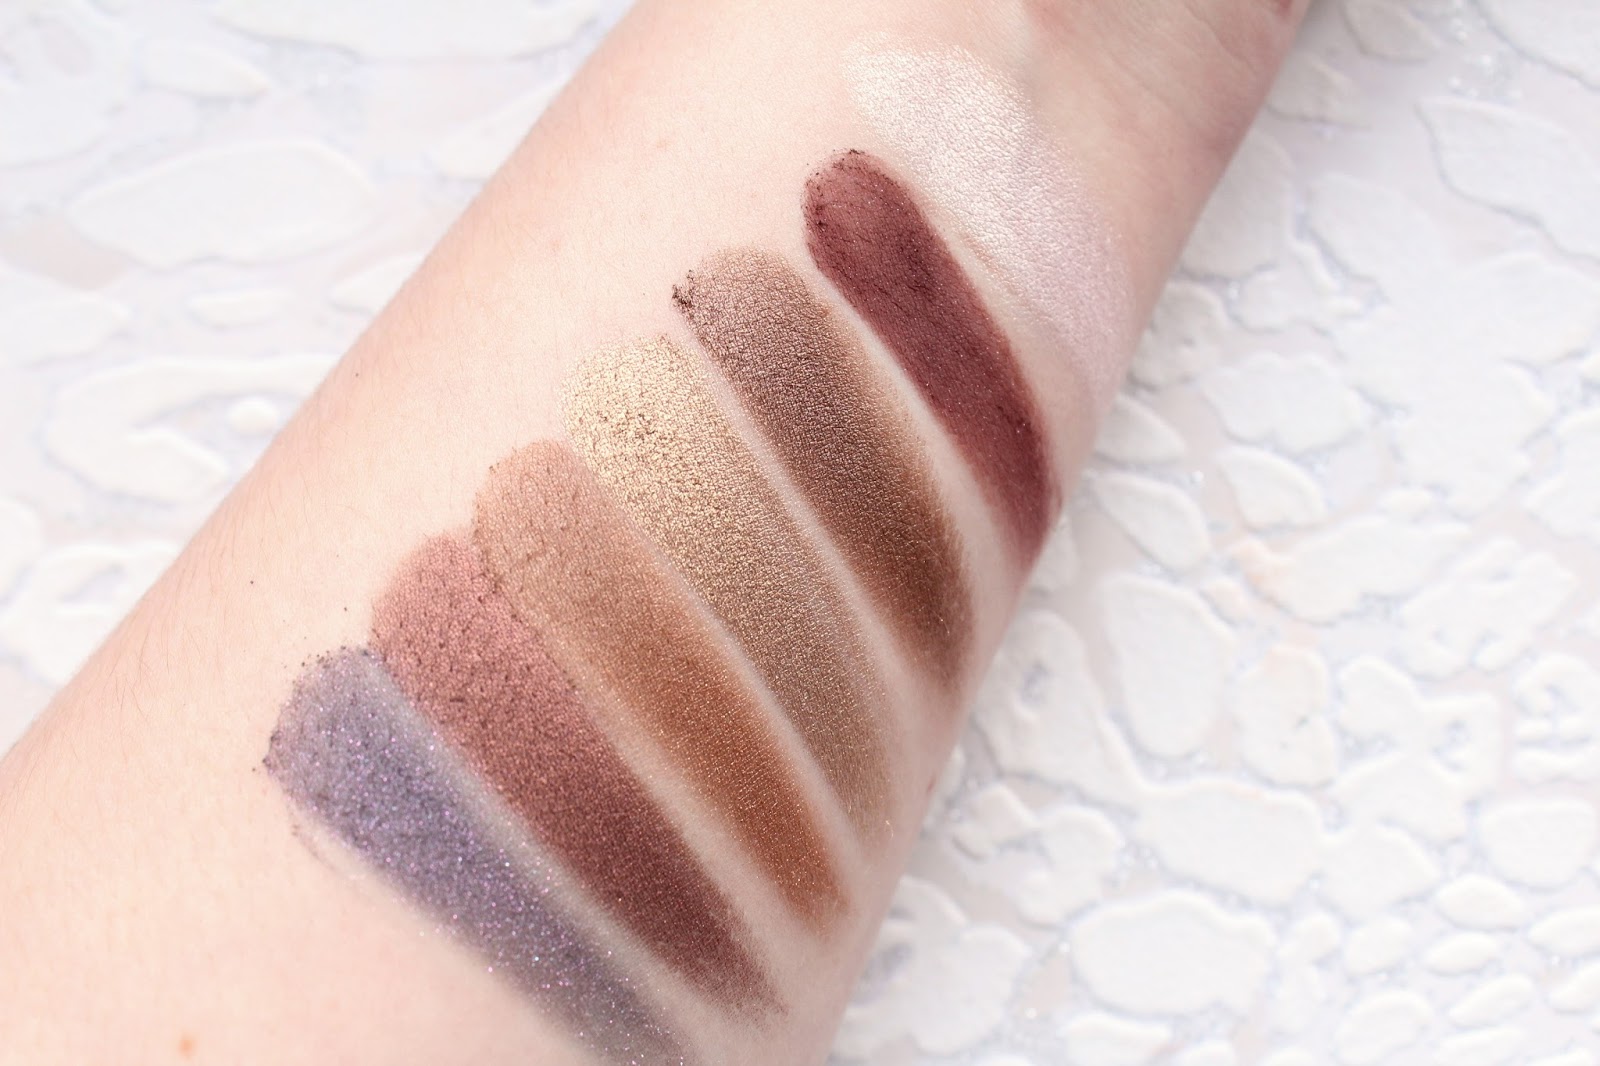 Too Faced Chocolate Bar Palette Swatches